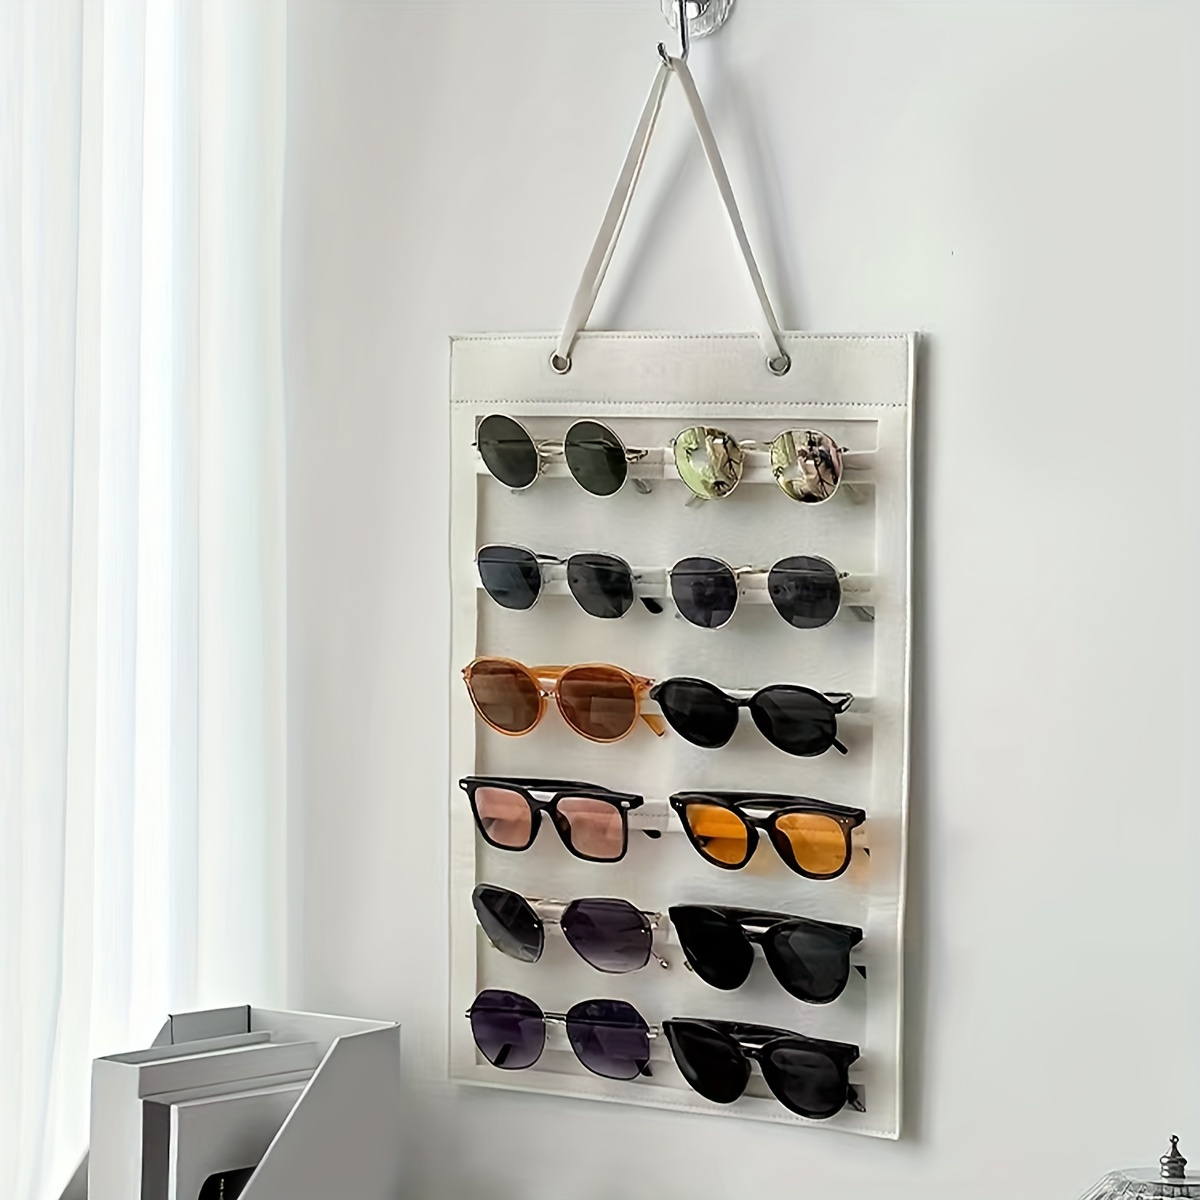 

1pc 12-slots Felt Sunglasses Organizer, Durable Hanging Glasses Holder, Dust Proof Storage Display Pocket, Wall Stand Organizer, Ideal Glasses Accessories, Home Supplies